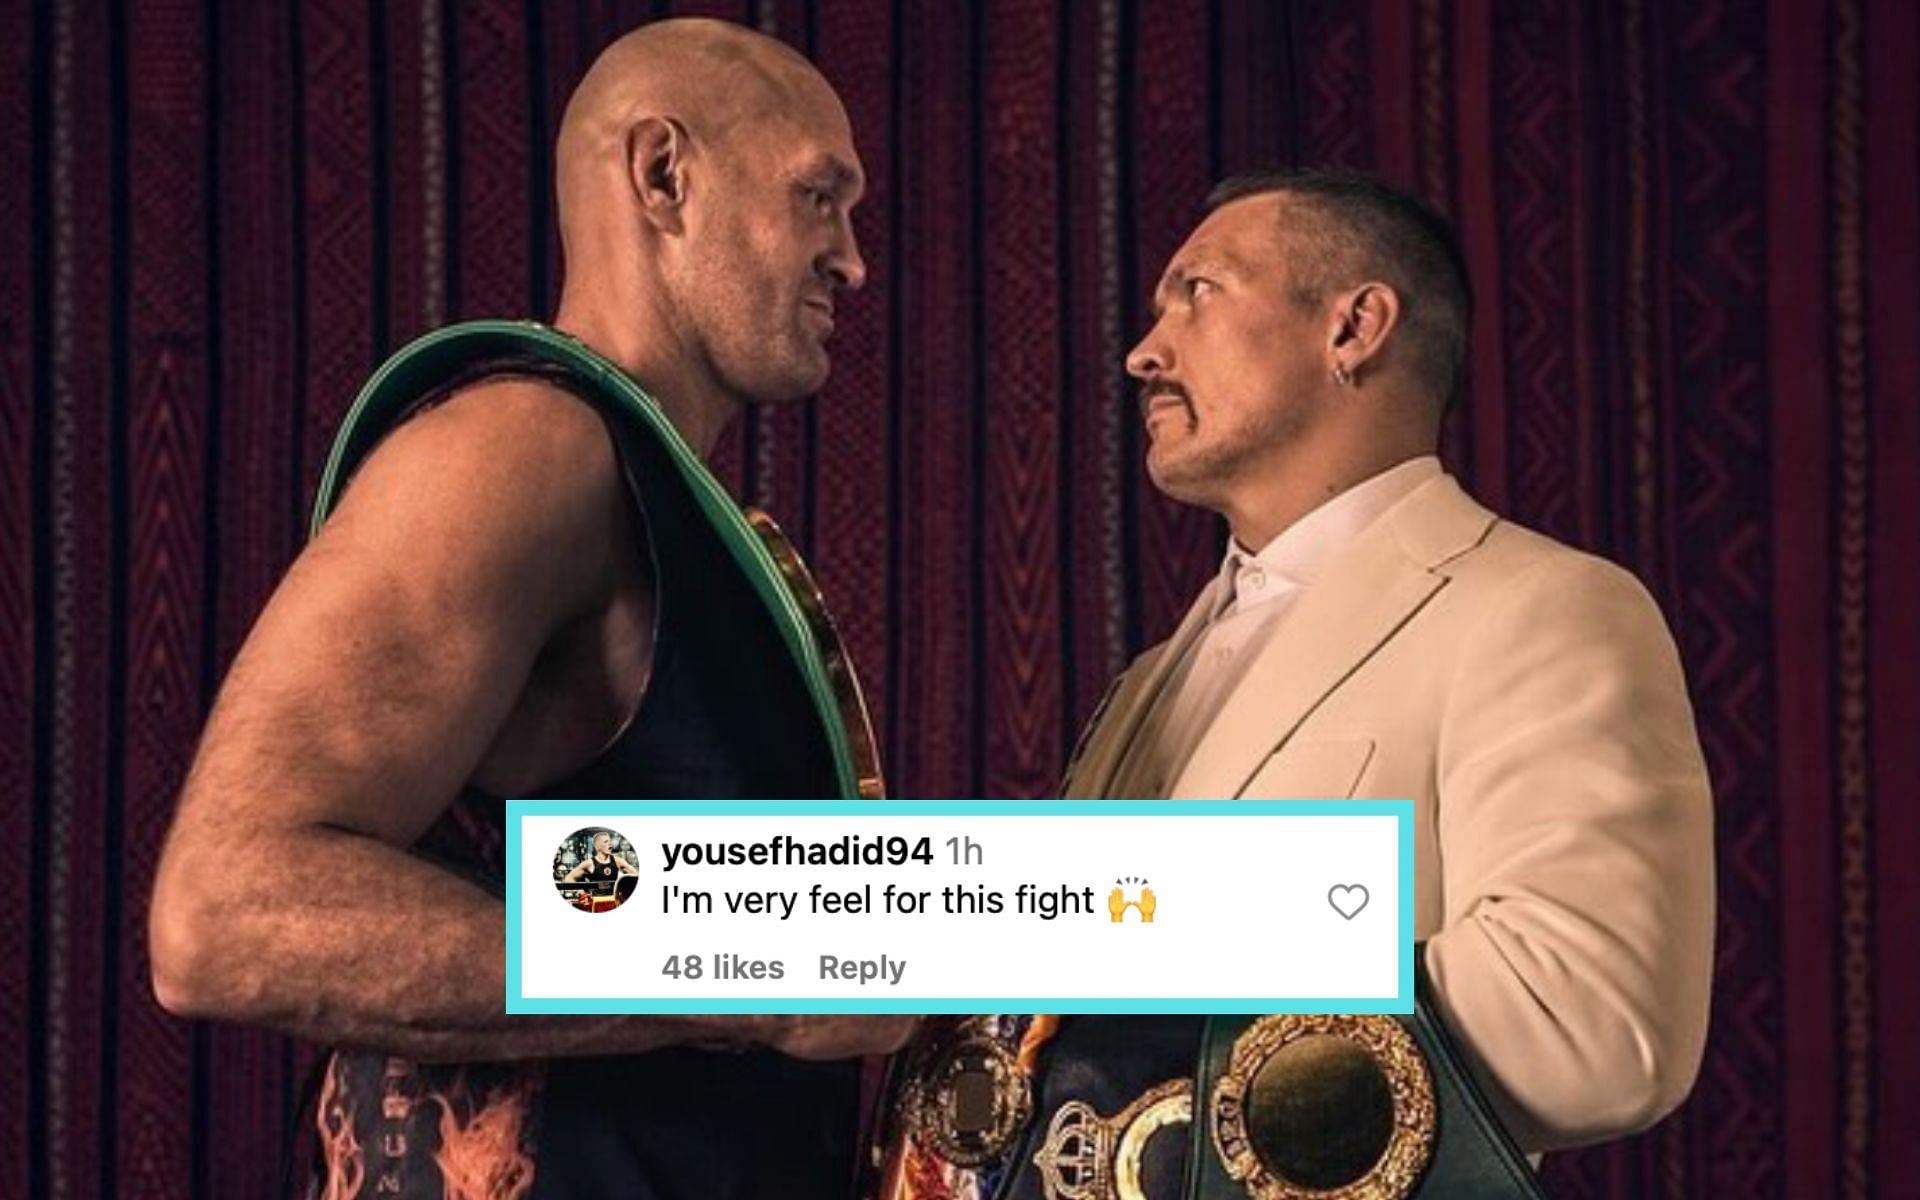 Fans react to Tyson Fury (left) weighing in heavier than Oleksandr Usyk (right) [Photo Courtesy @tysonfury on Instagram]